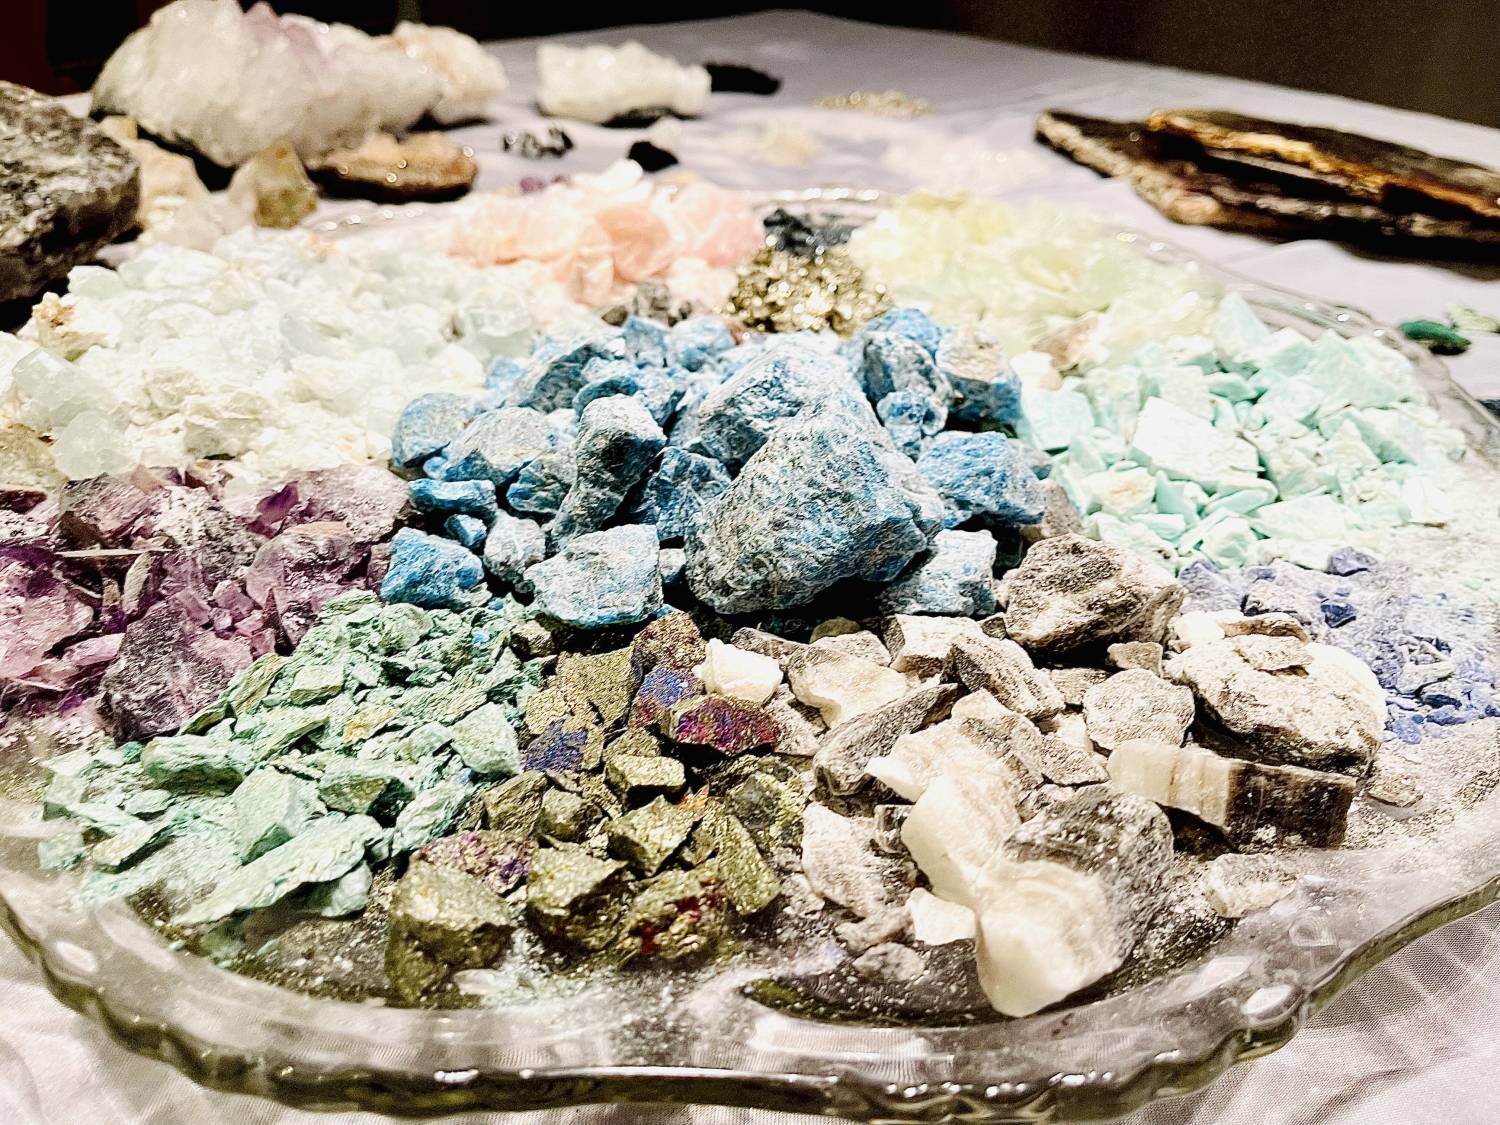 Photo of a platter of gemstones and minerals that hav ebeen smashed and organized by color.